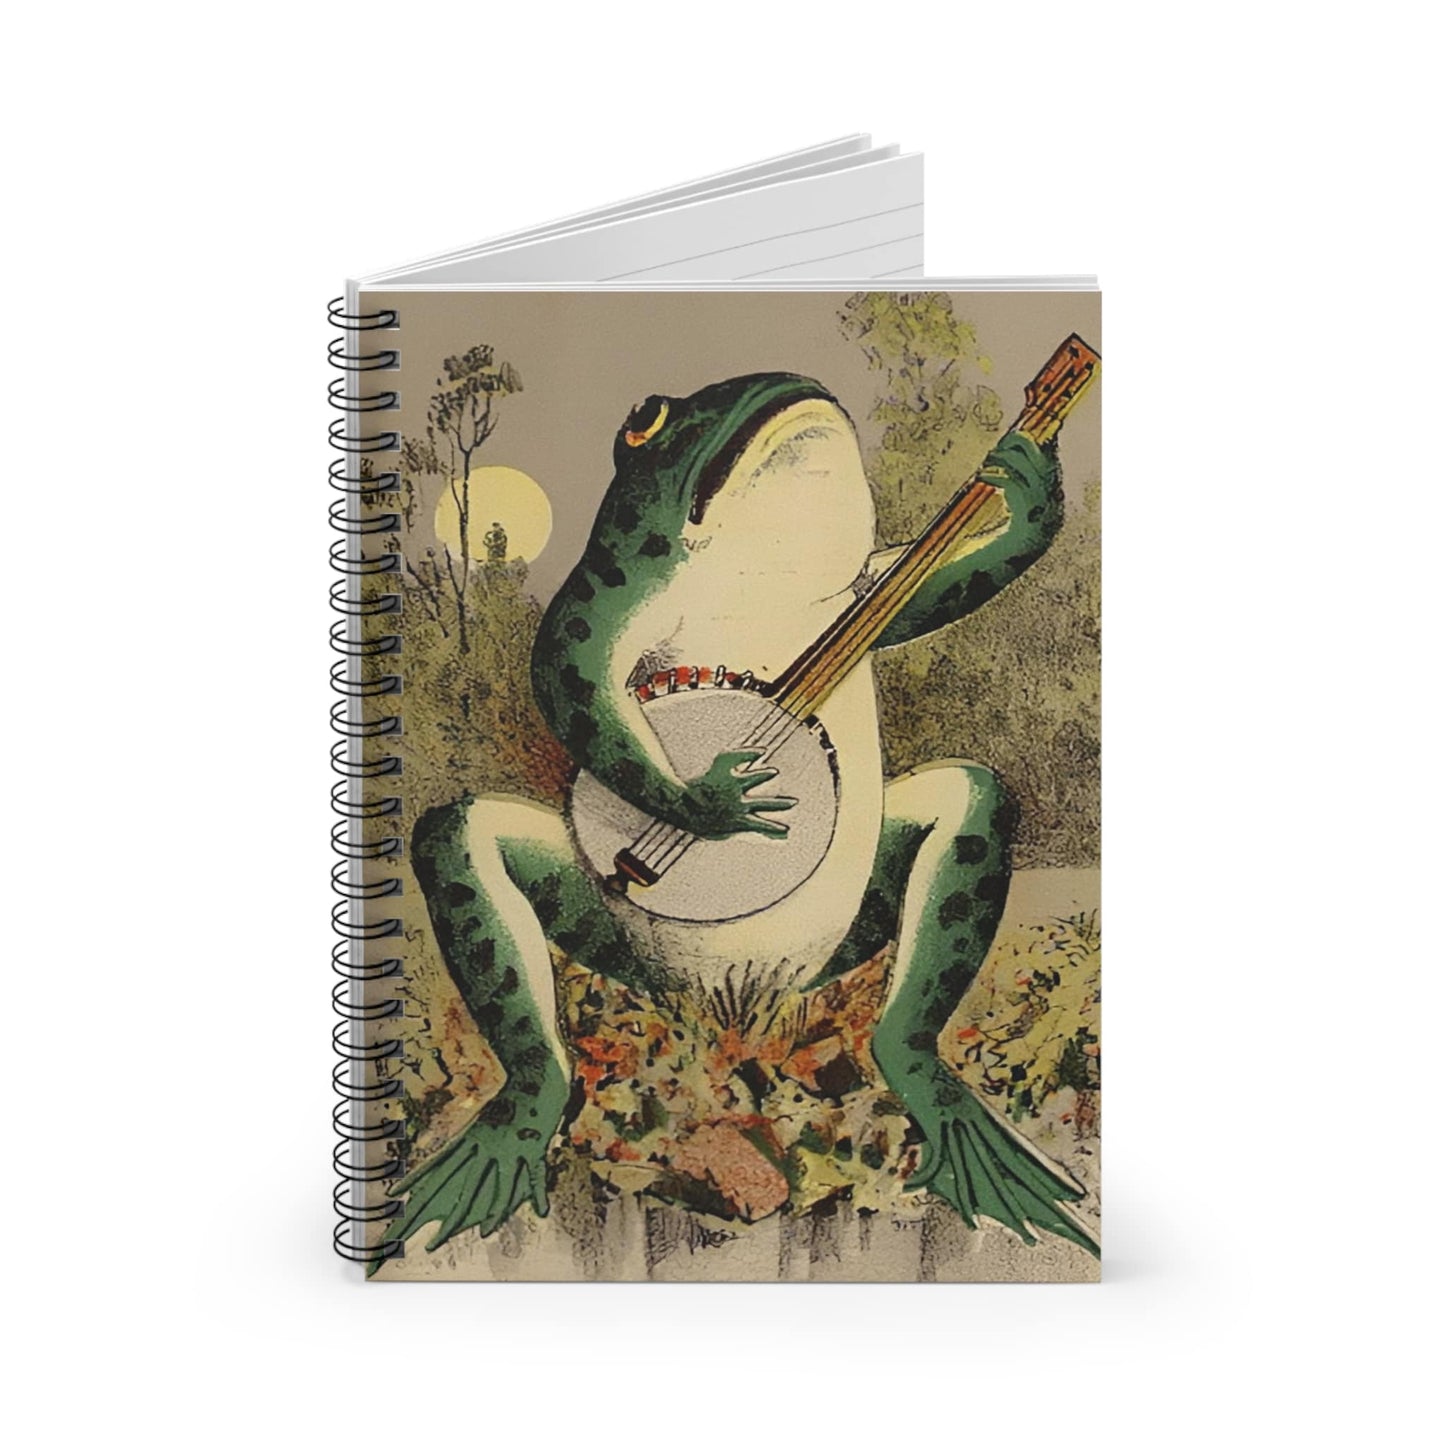 Funny Animal Spiral Notebook Standing up on White Desk